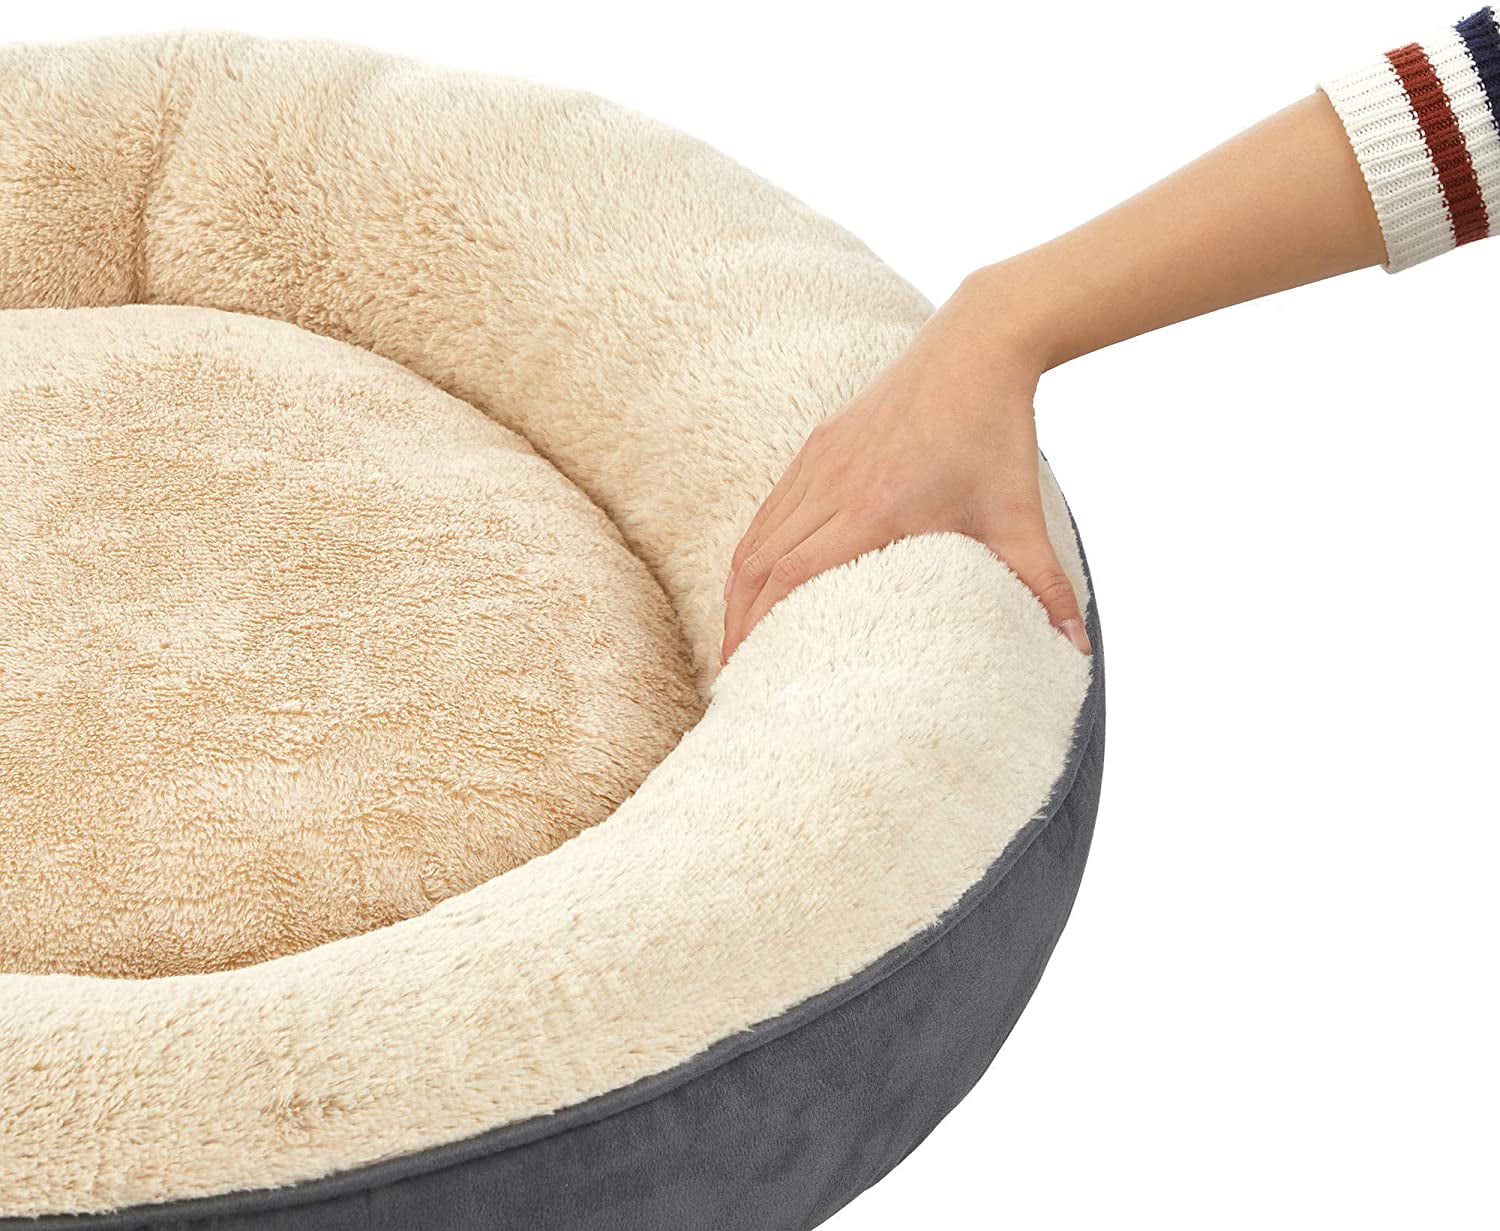 FEANDREA Dog Bed Washable Cat Bed Donut-Shaped Dog Sofa with Removable Inner Cushion Soft Plush Surface Gray 